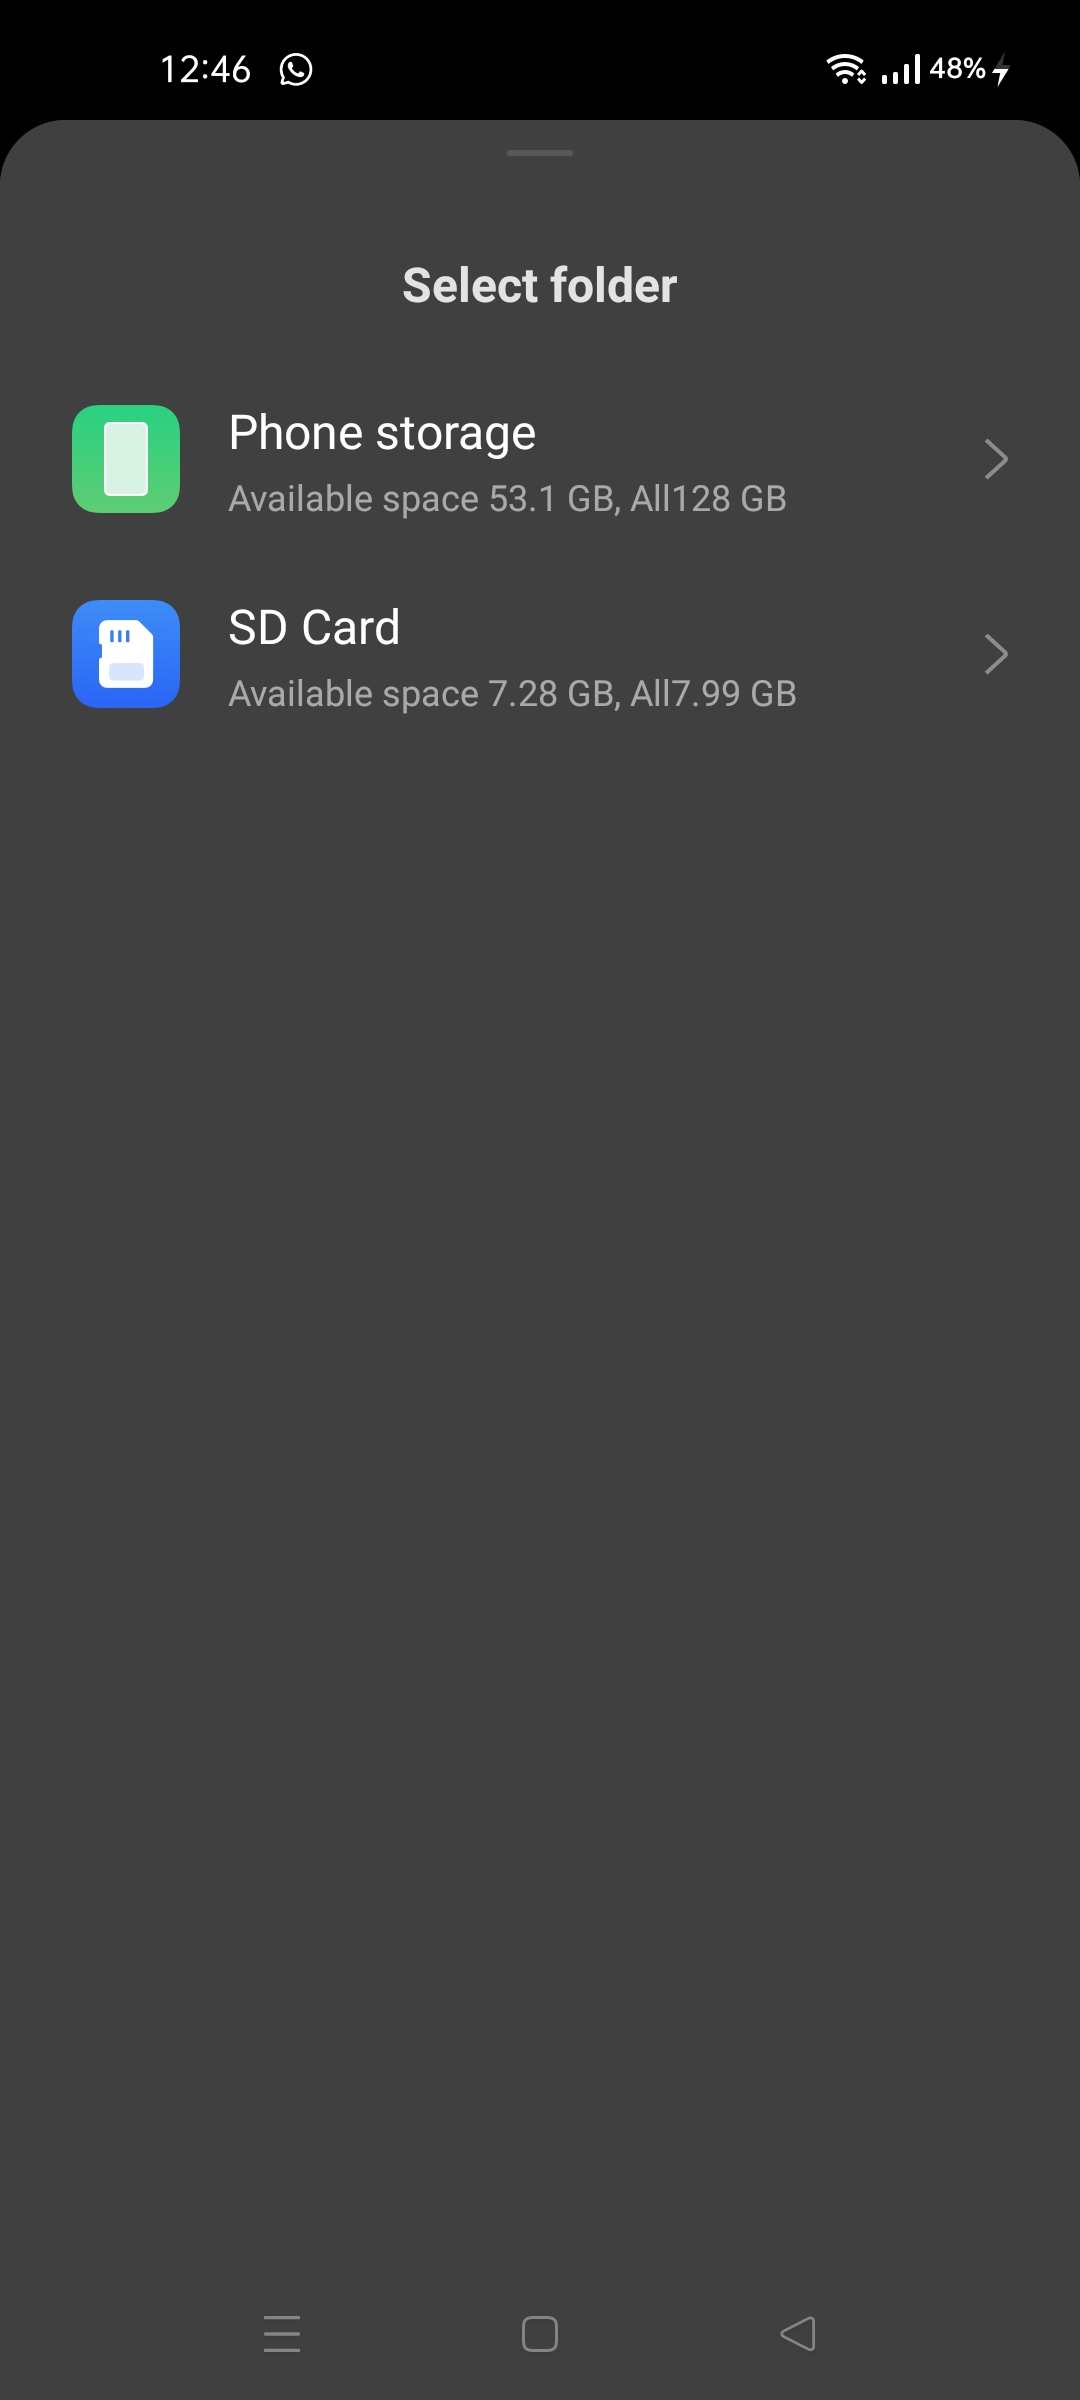 Open Phone storage in file manager